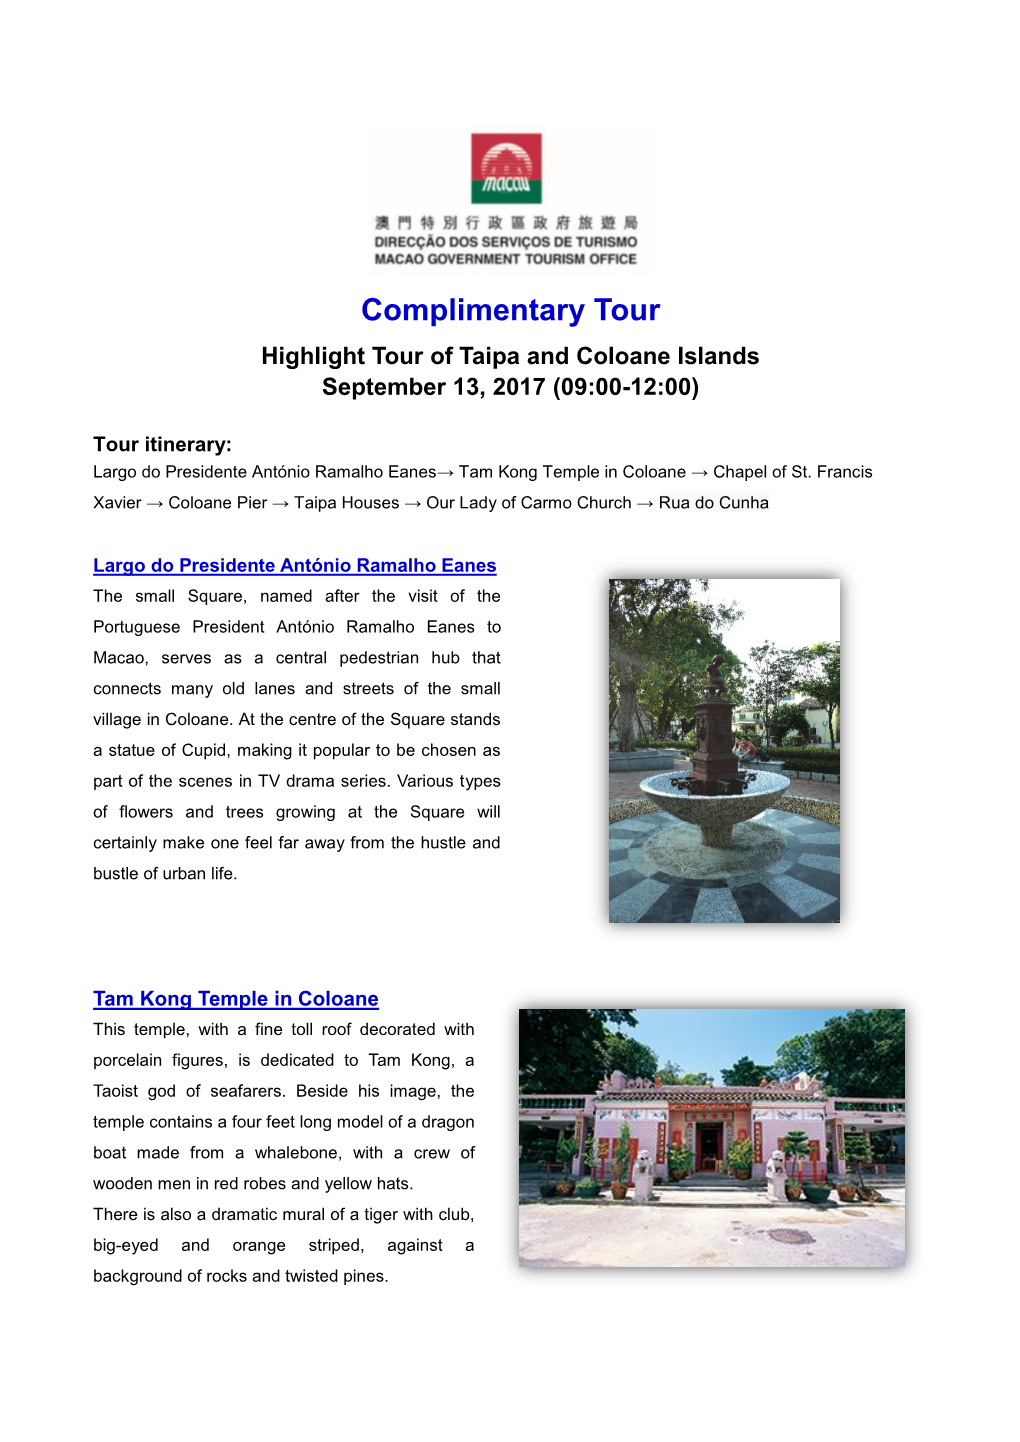 Complimentary Tour Highlight Tour of Taipa and Coloane Islands September 13, 2017 (09:00-12:00)